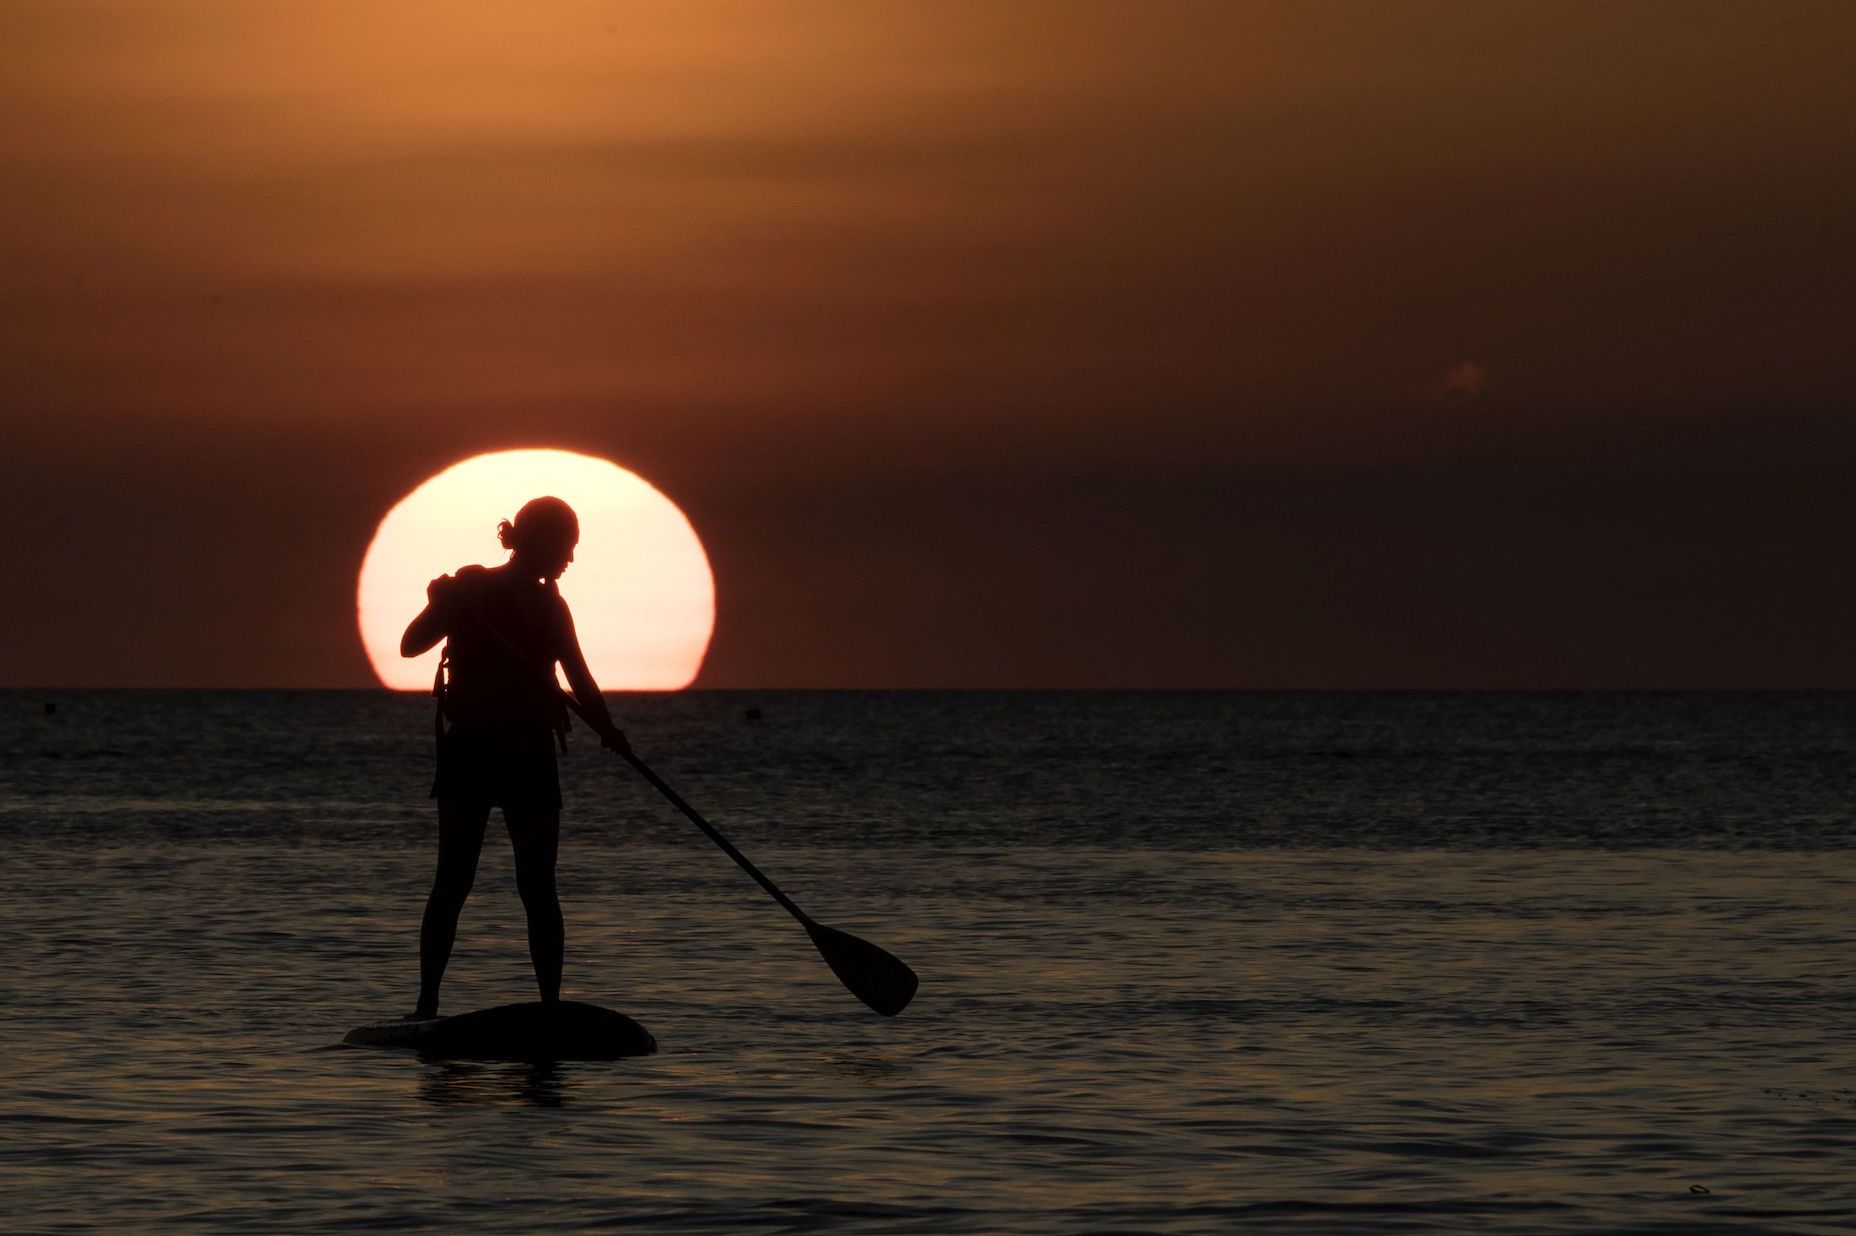 A tourist practices with a paddleboard during a sunset in Philippine's Boracay island on April 24, 2018, ahead of its closure. - Police with assault rifles patrolled entry points to Boracay island on April 24 just days before a six-month shutdown and clean-up of one of the Philippines' top tourist attractions. (Photo by NOEL CELIS / AFP) (Photo credit should read NOEL CELIS/AFP via Getty Images)